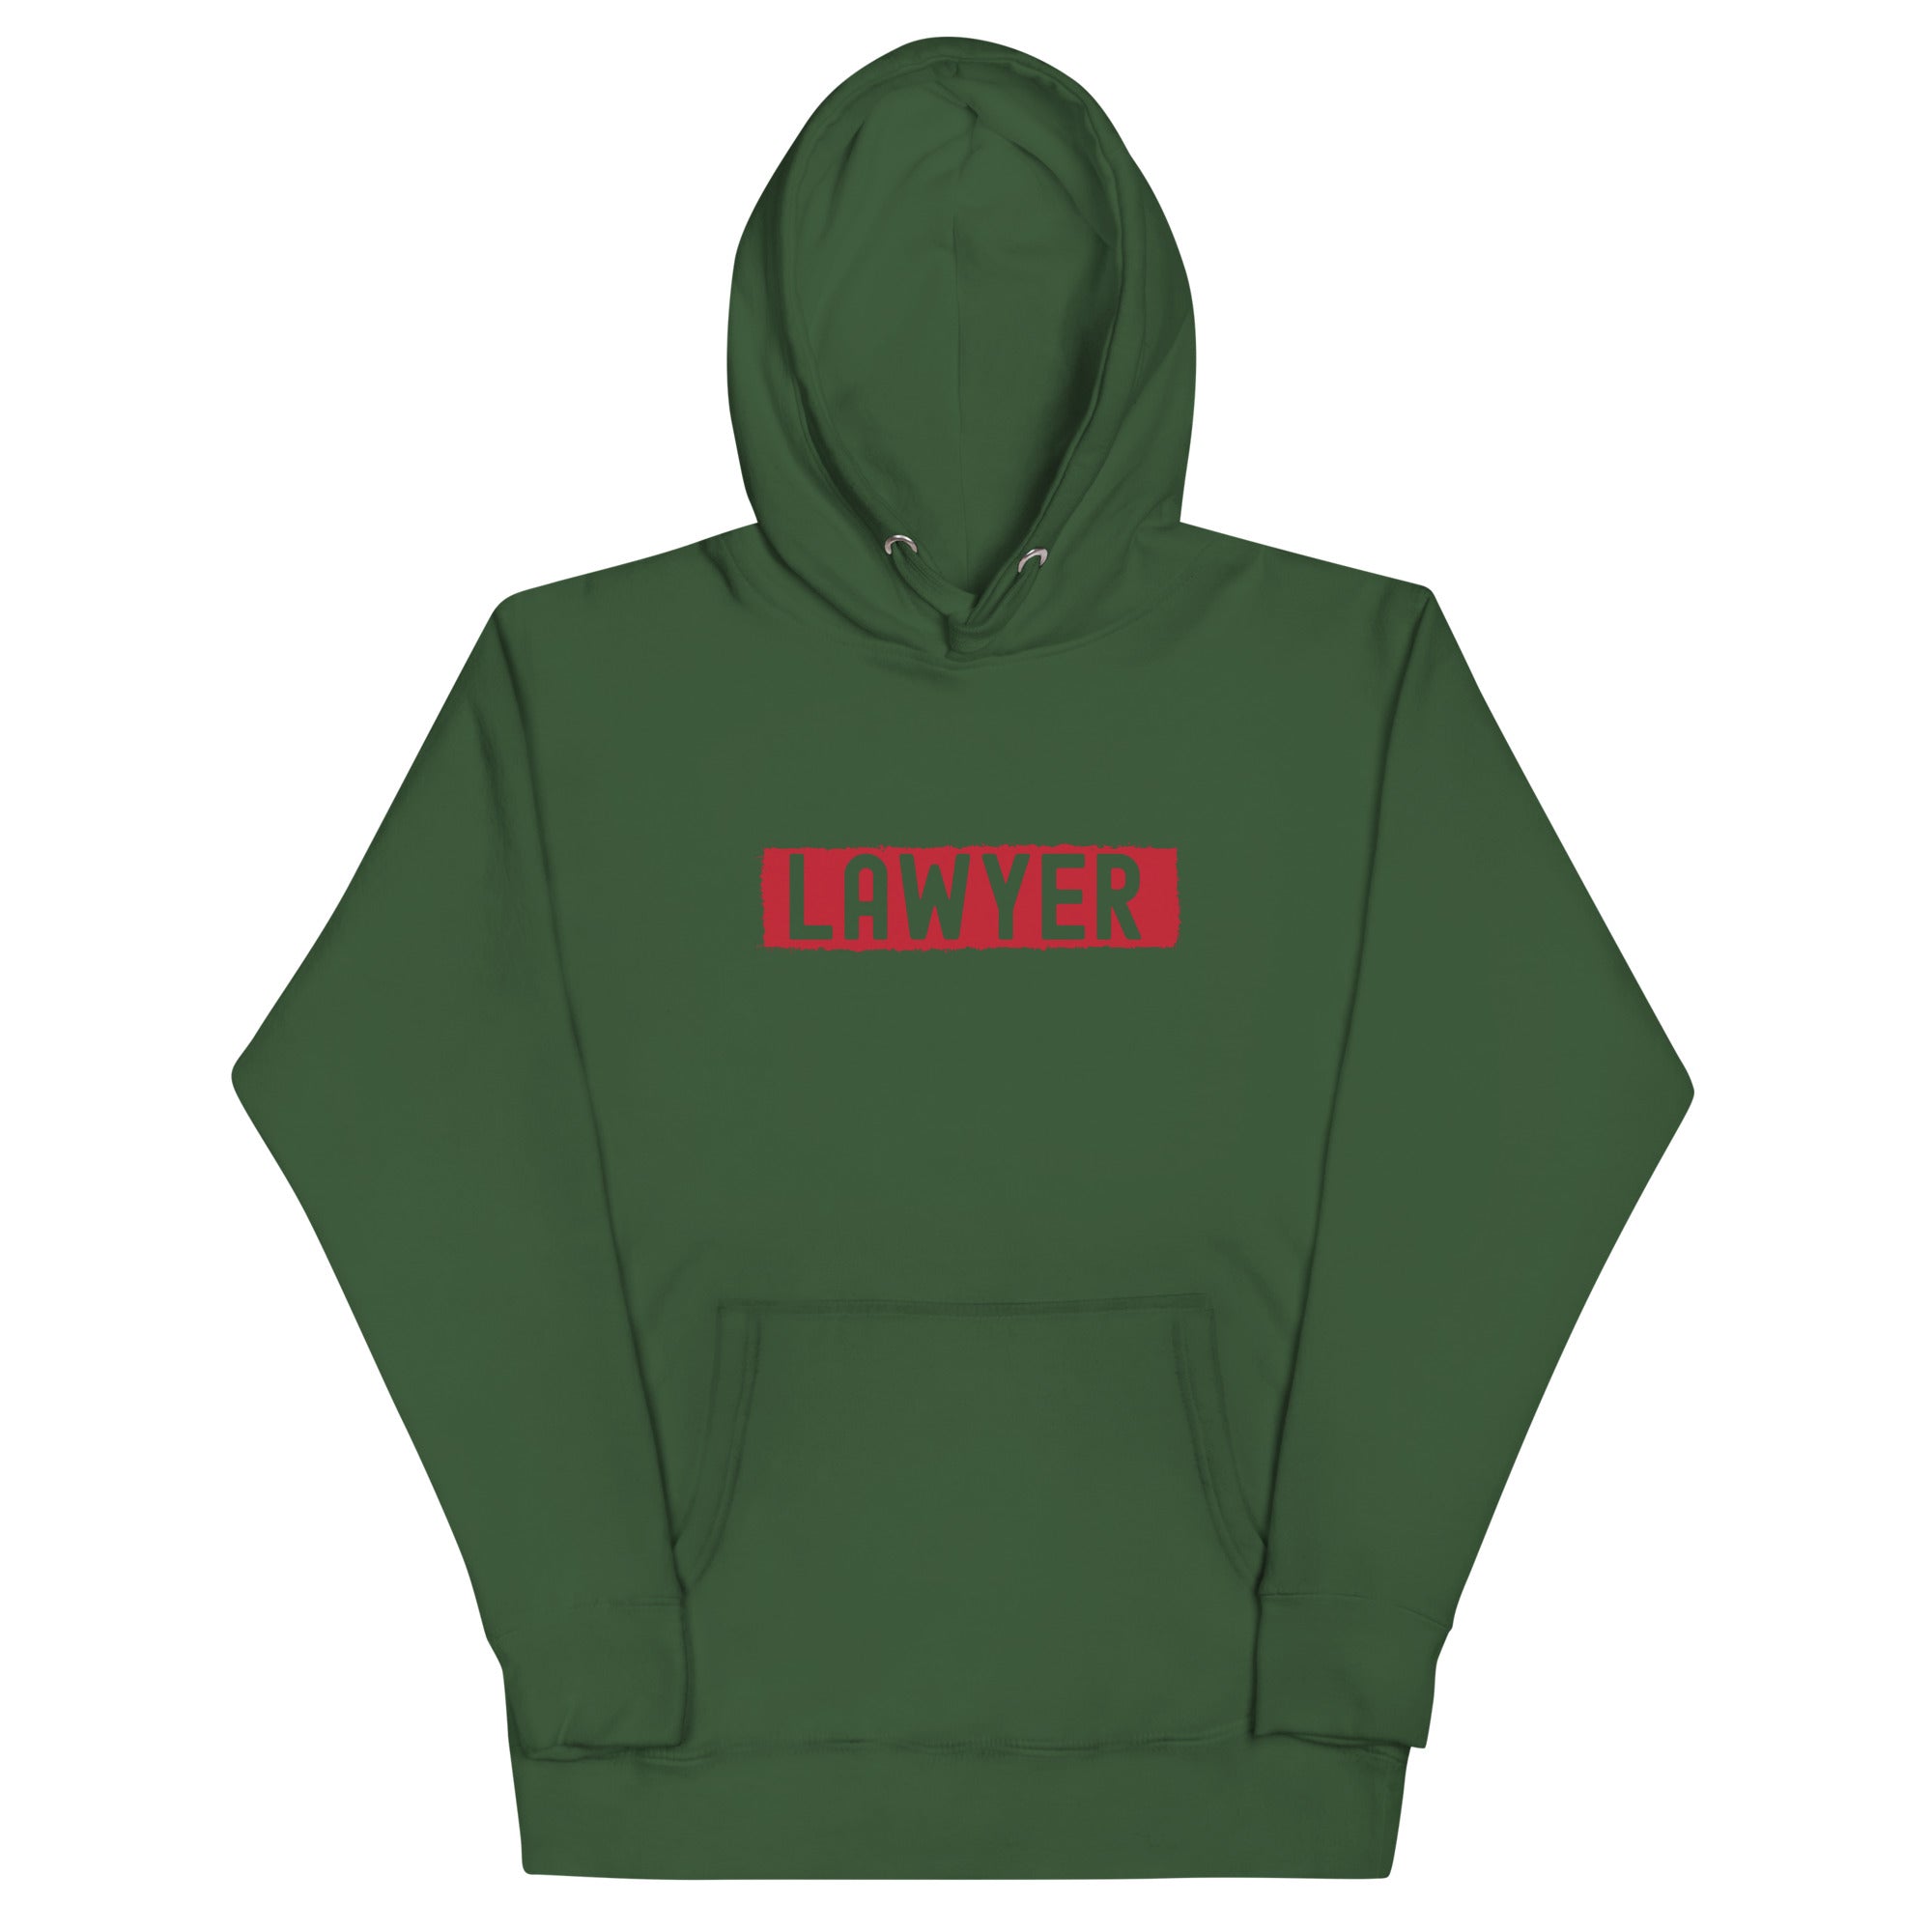 Unisex Hoodie | Lawyer (design with red highghliting)